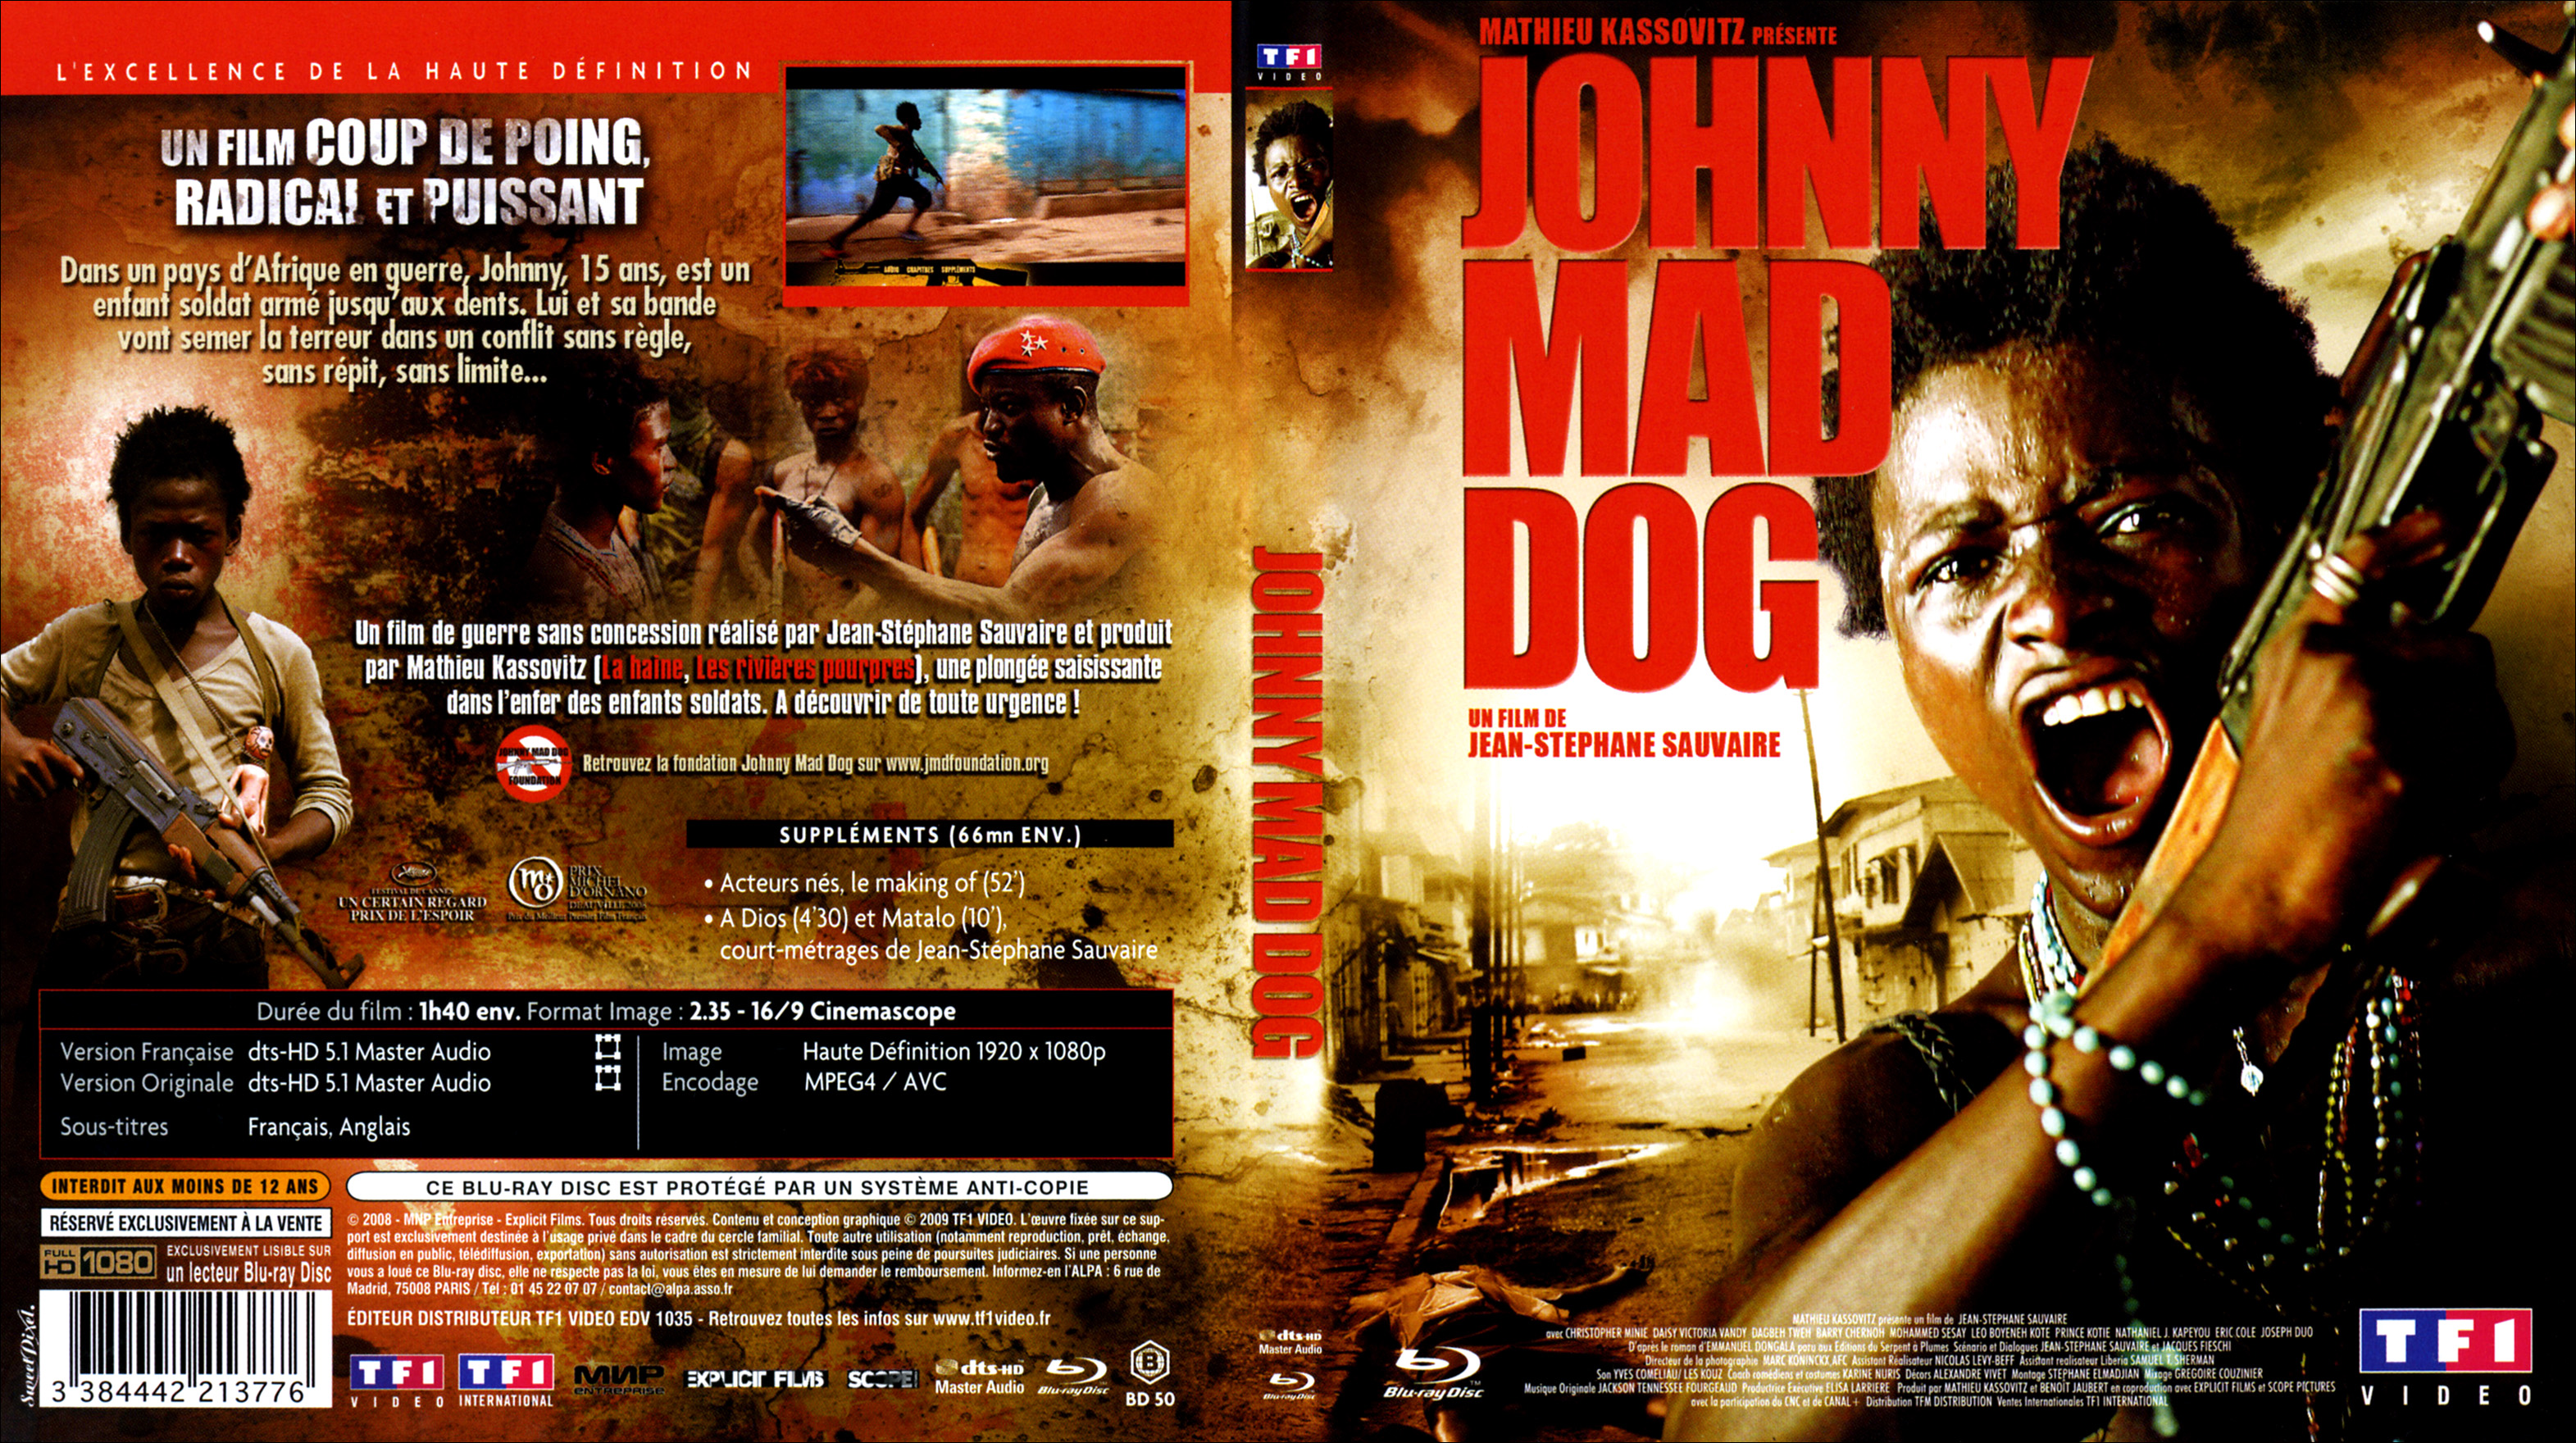 Jaquette DVD Johnny mad dog (BLU-RAY)